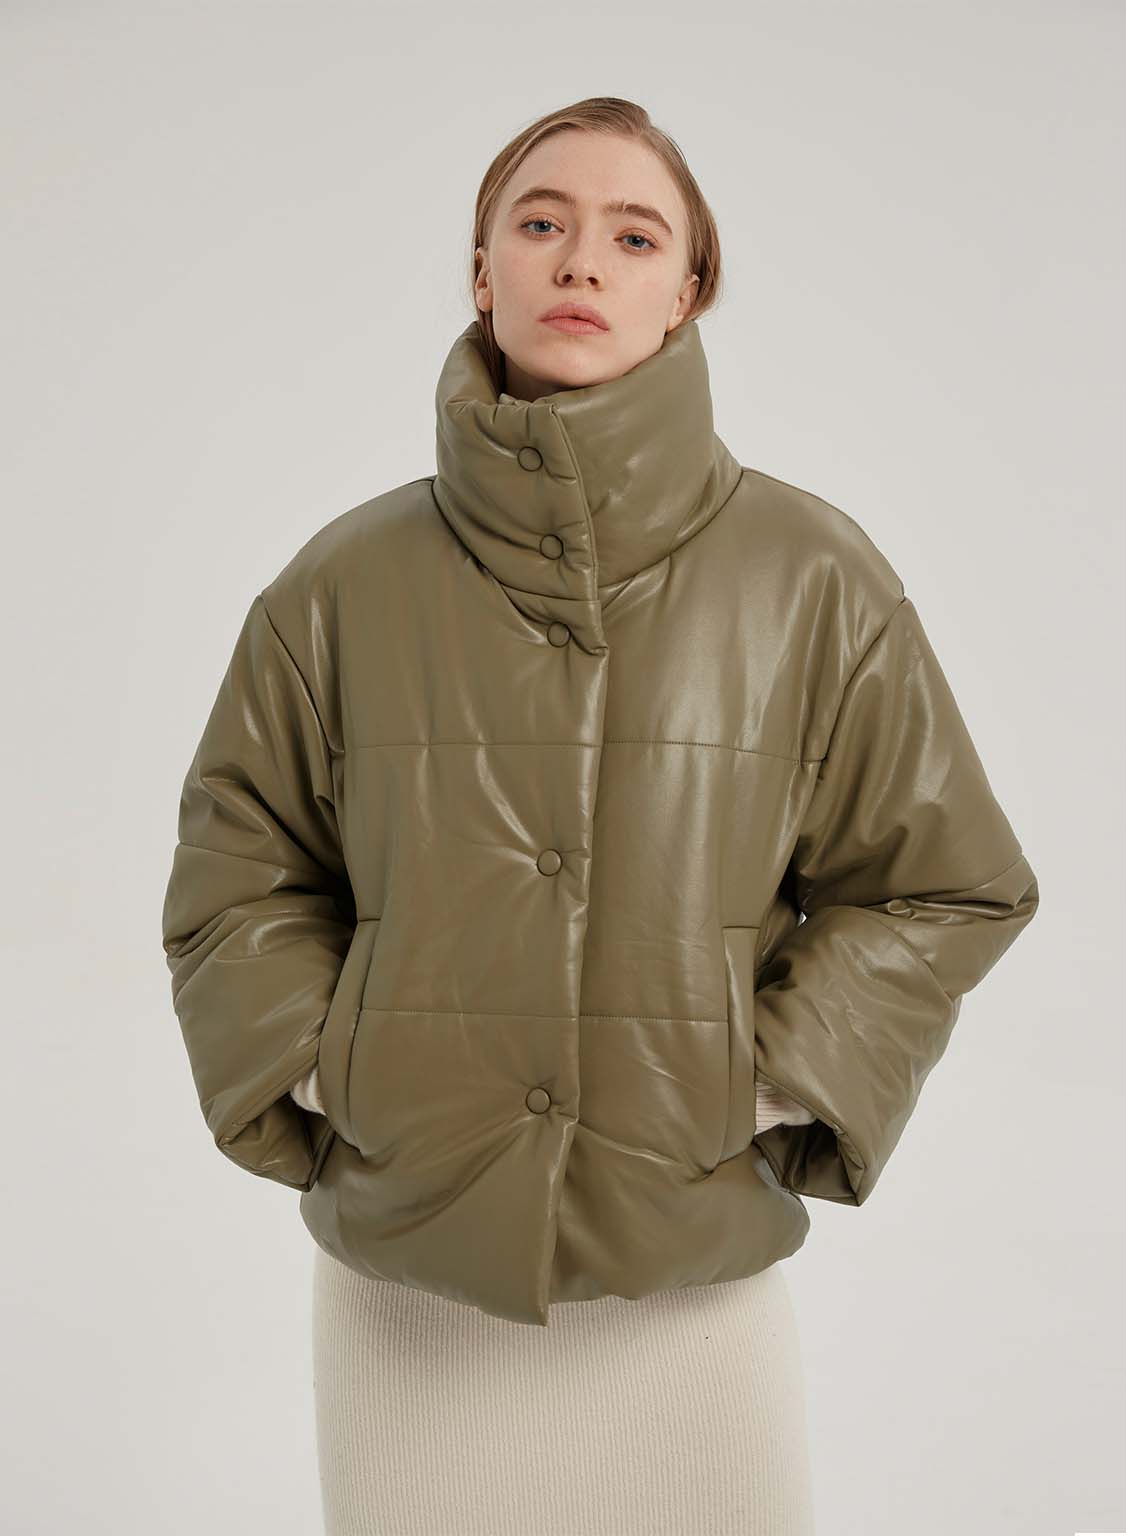 24 Best Puffer Jackets to Keep You Warm—Puffer Jackets for Women